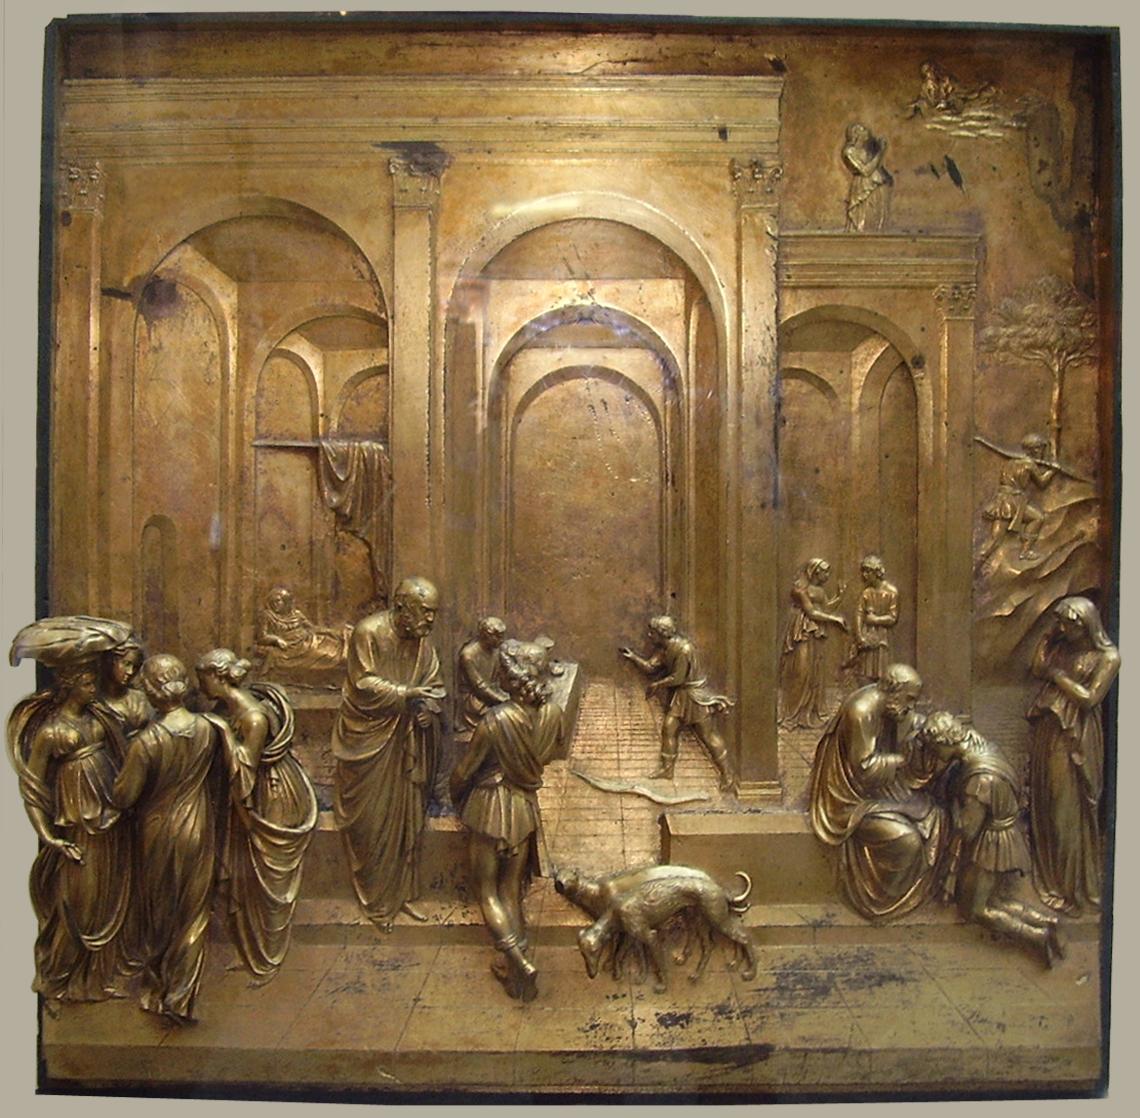 Four Women, a drawing by Francesco Furini after Ghiberti's Paradise Gate  7